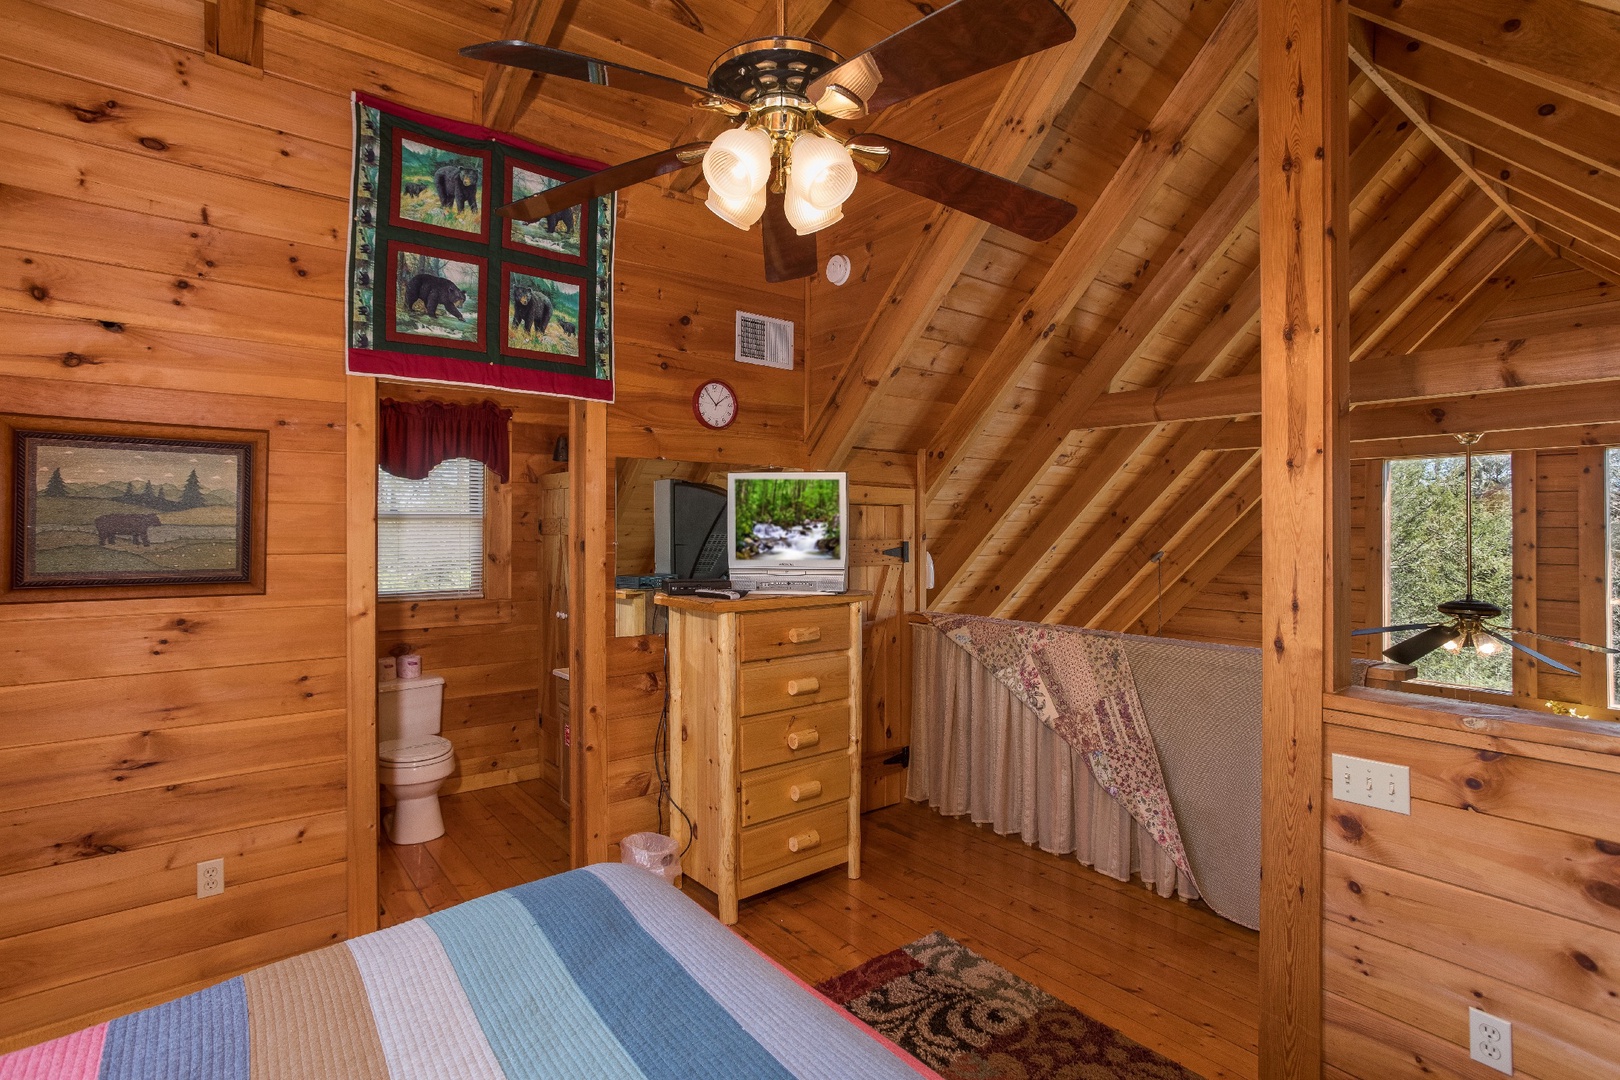 Television, dresser, and en suite in the loft at Cloud 9, a 1-bedroom cabin rental located in Pigeon Forge